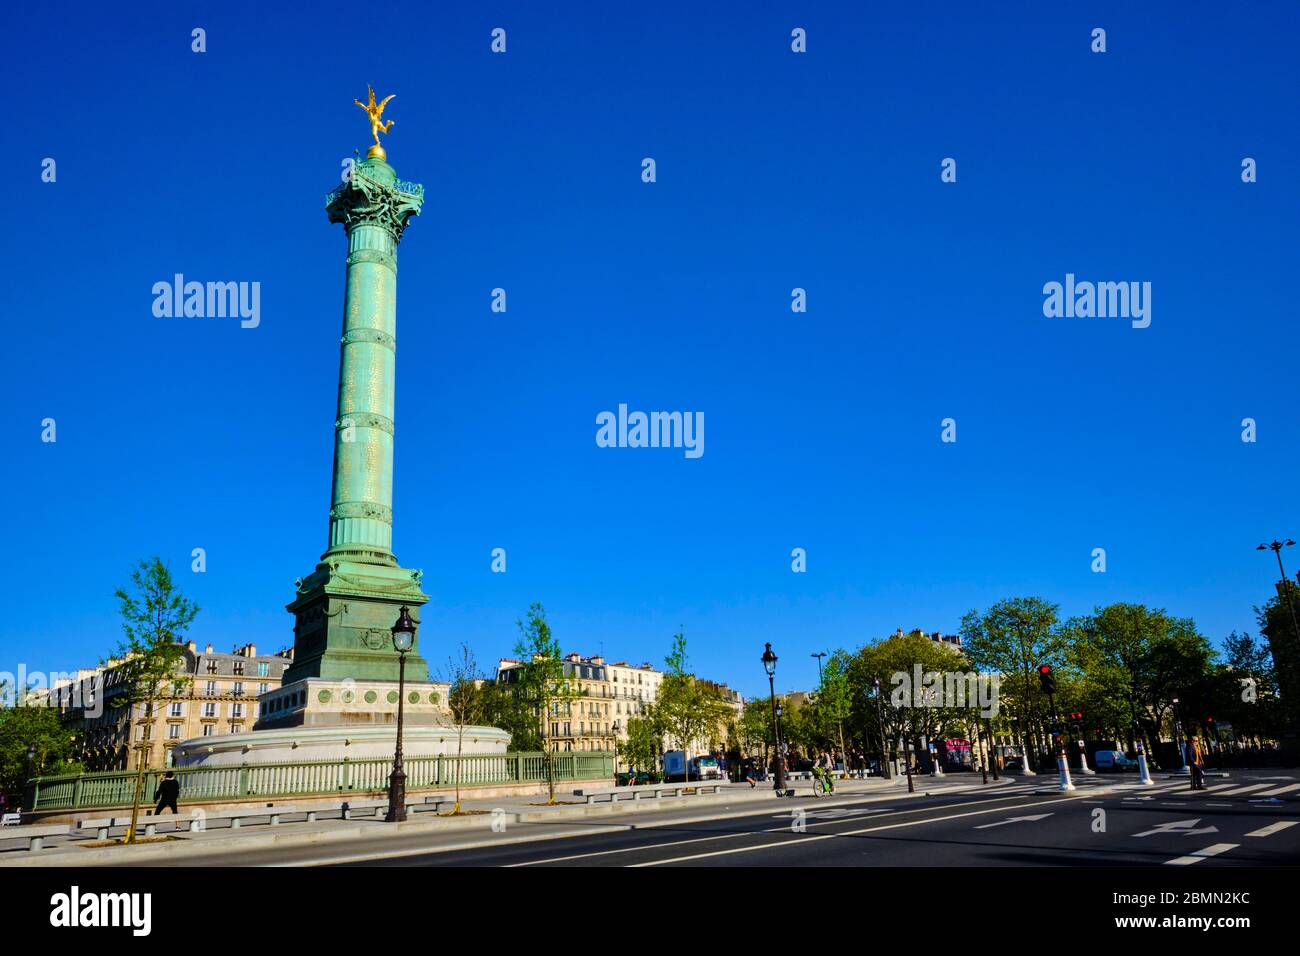 France, Paris, Bastille square during the lockdown of Covid 19 Stock Photo